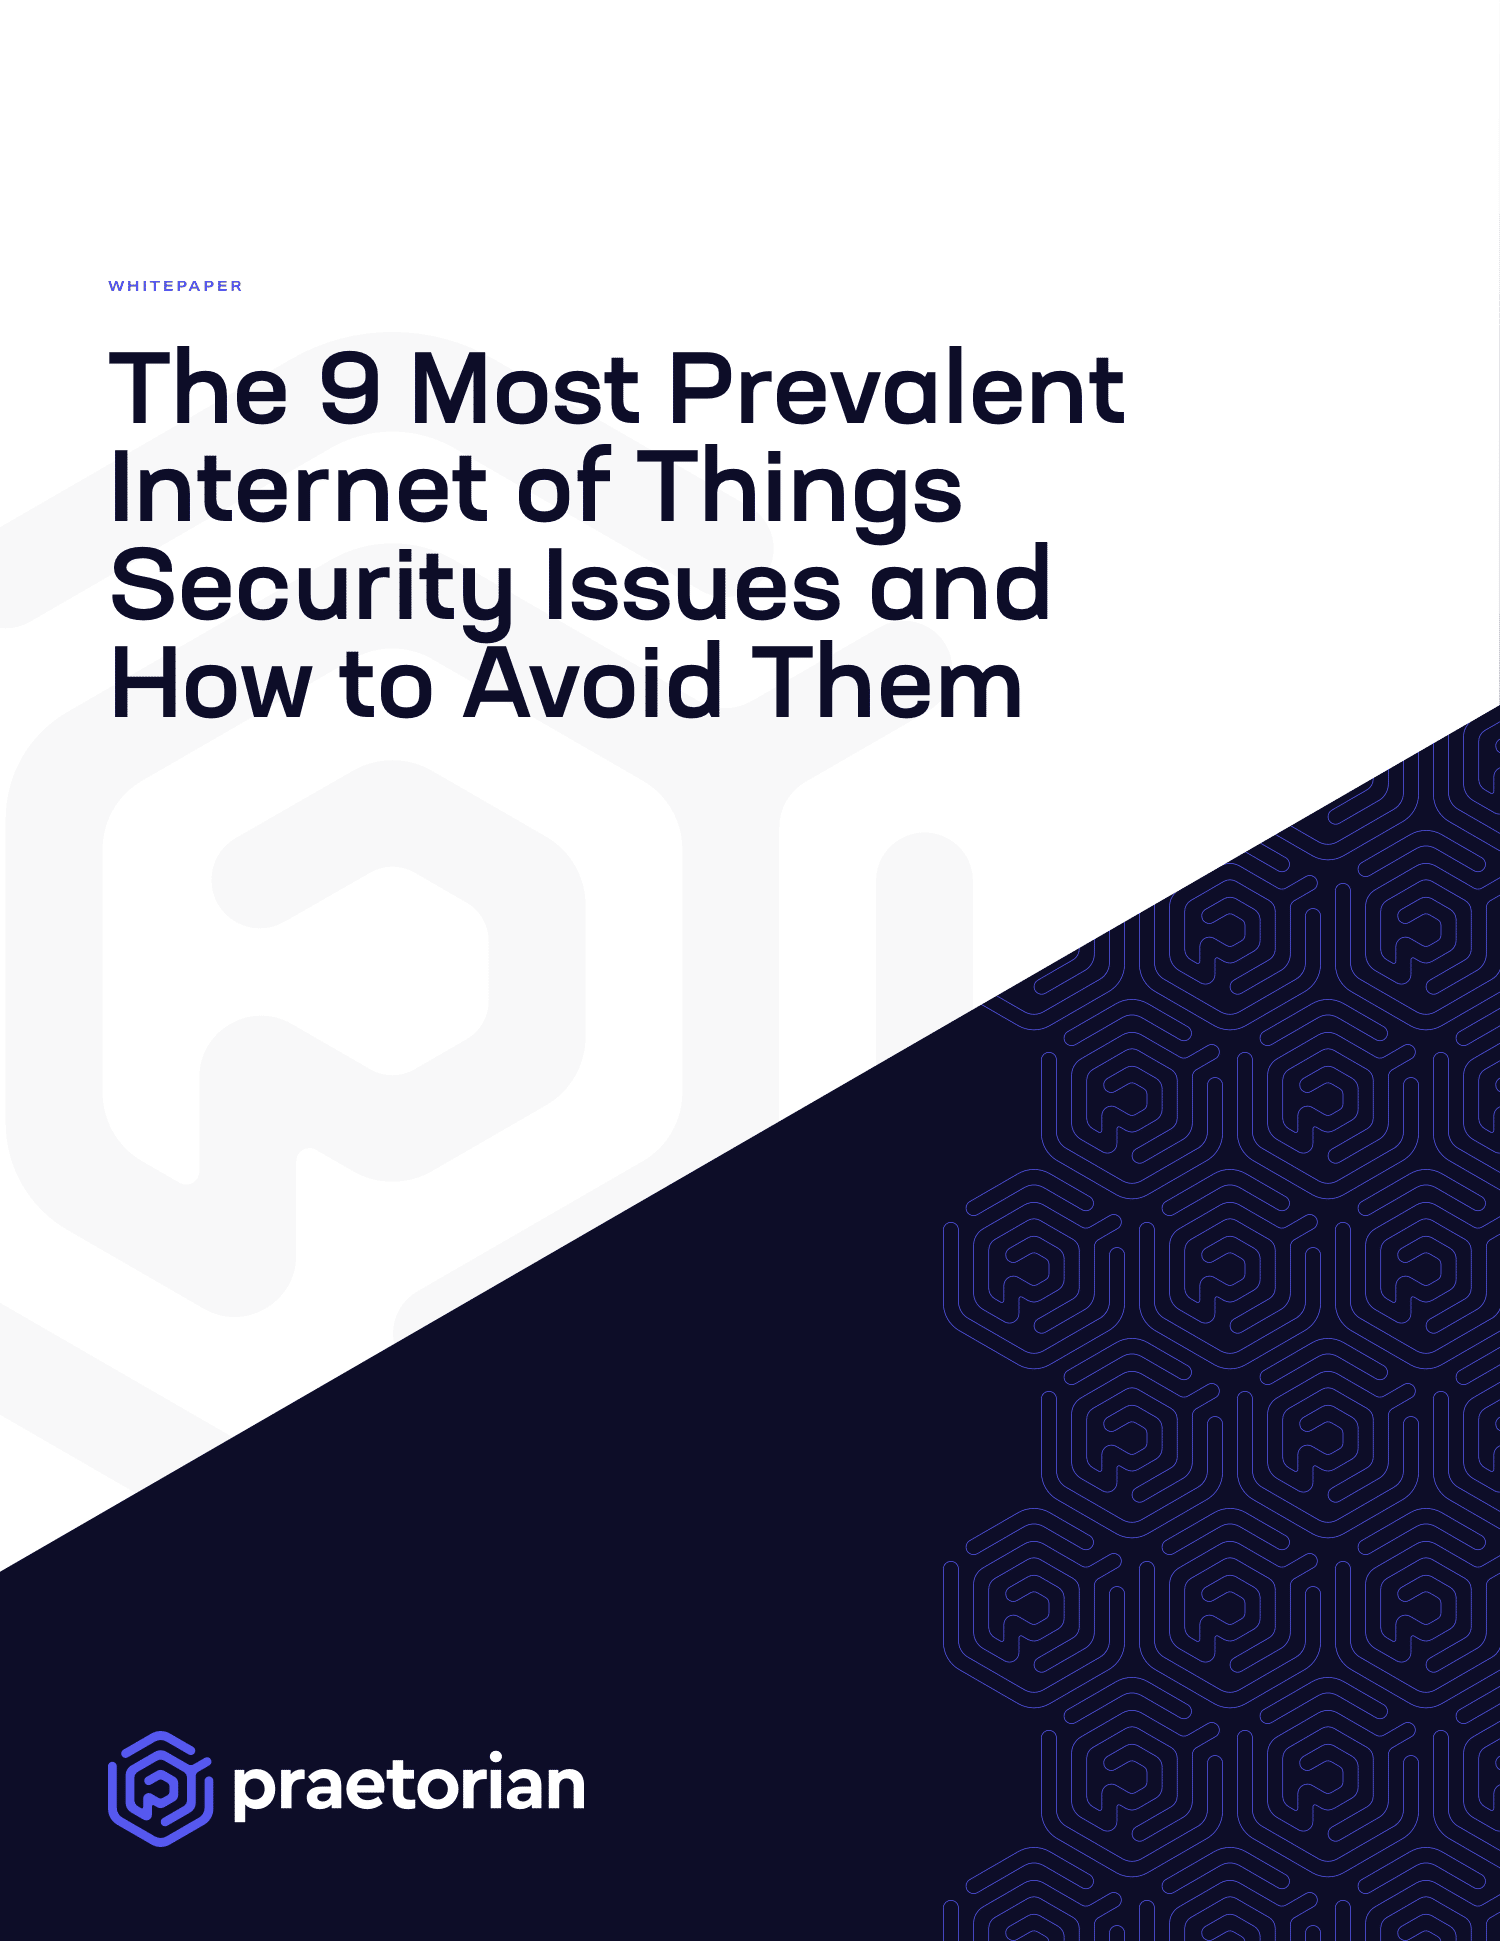 The 9 Most Prevalent Internet of Things Security Issues and How to Avoid Them